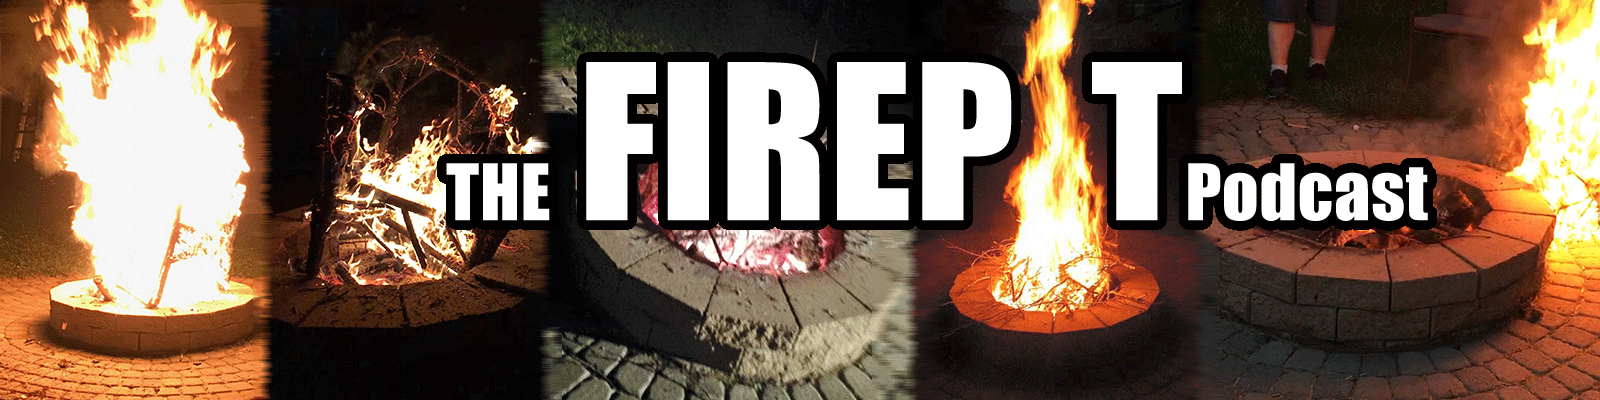 The Firepit Podcast